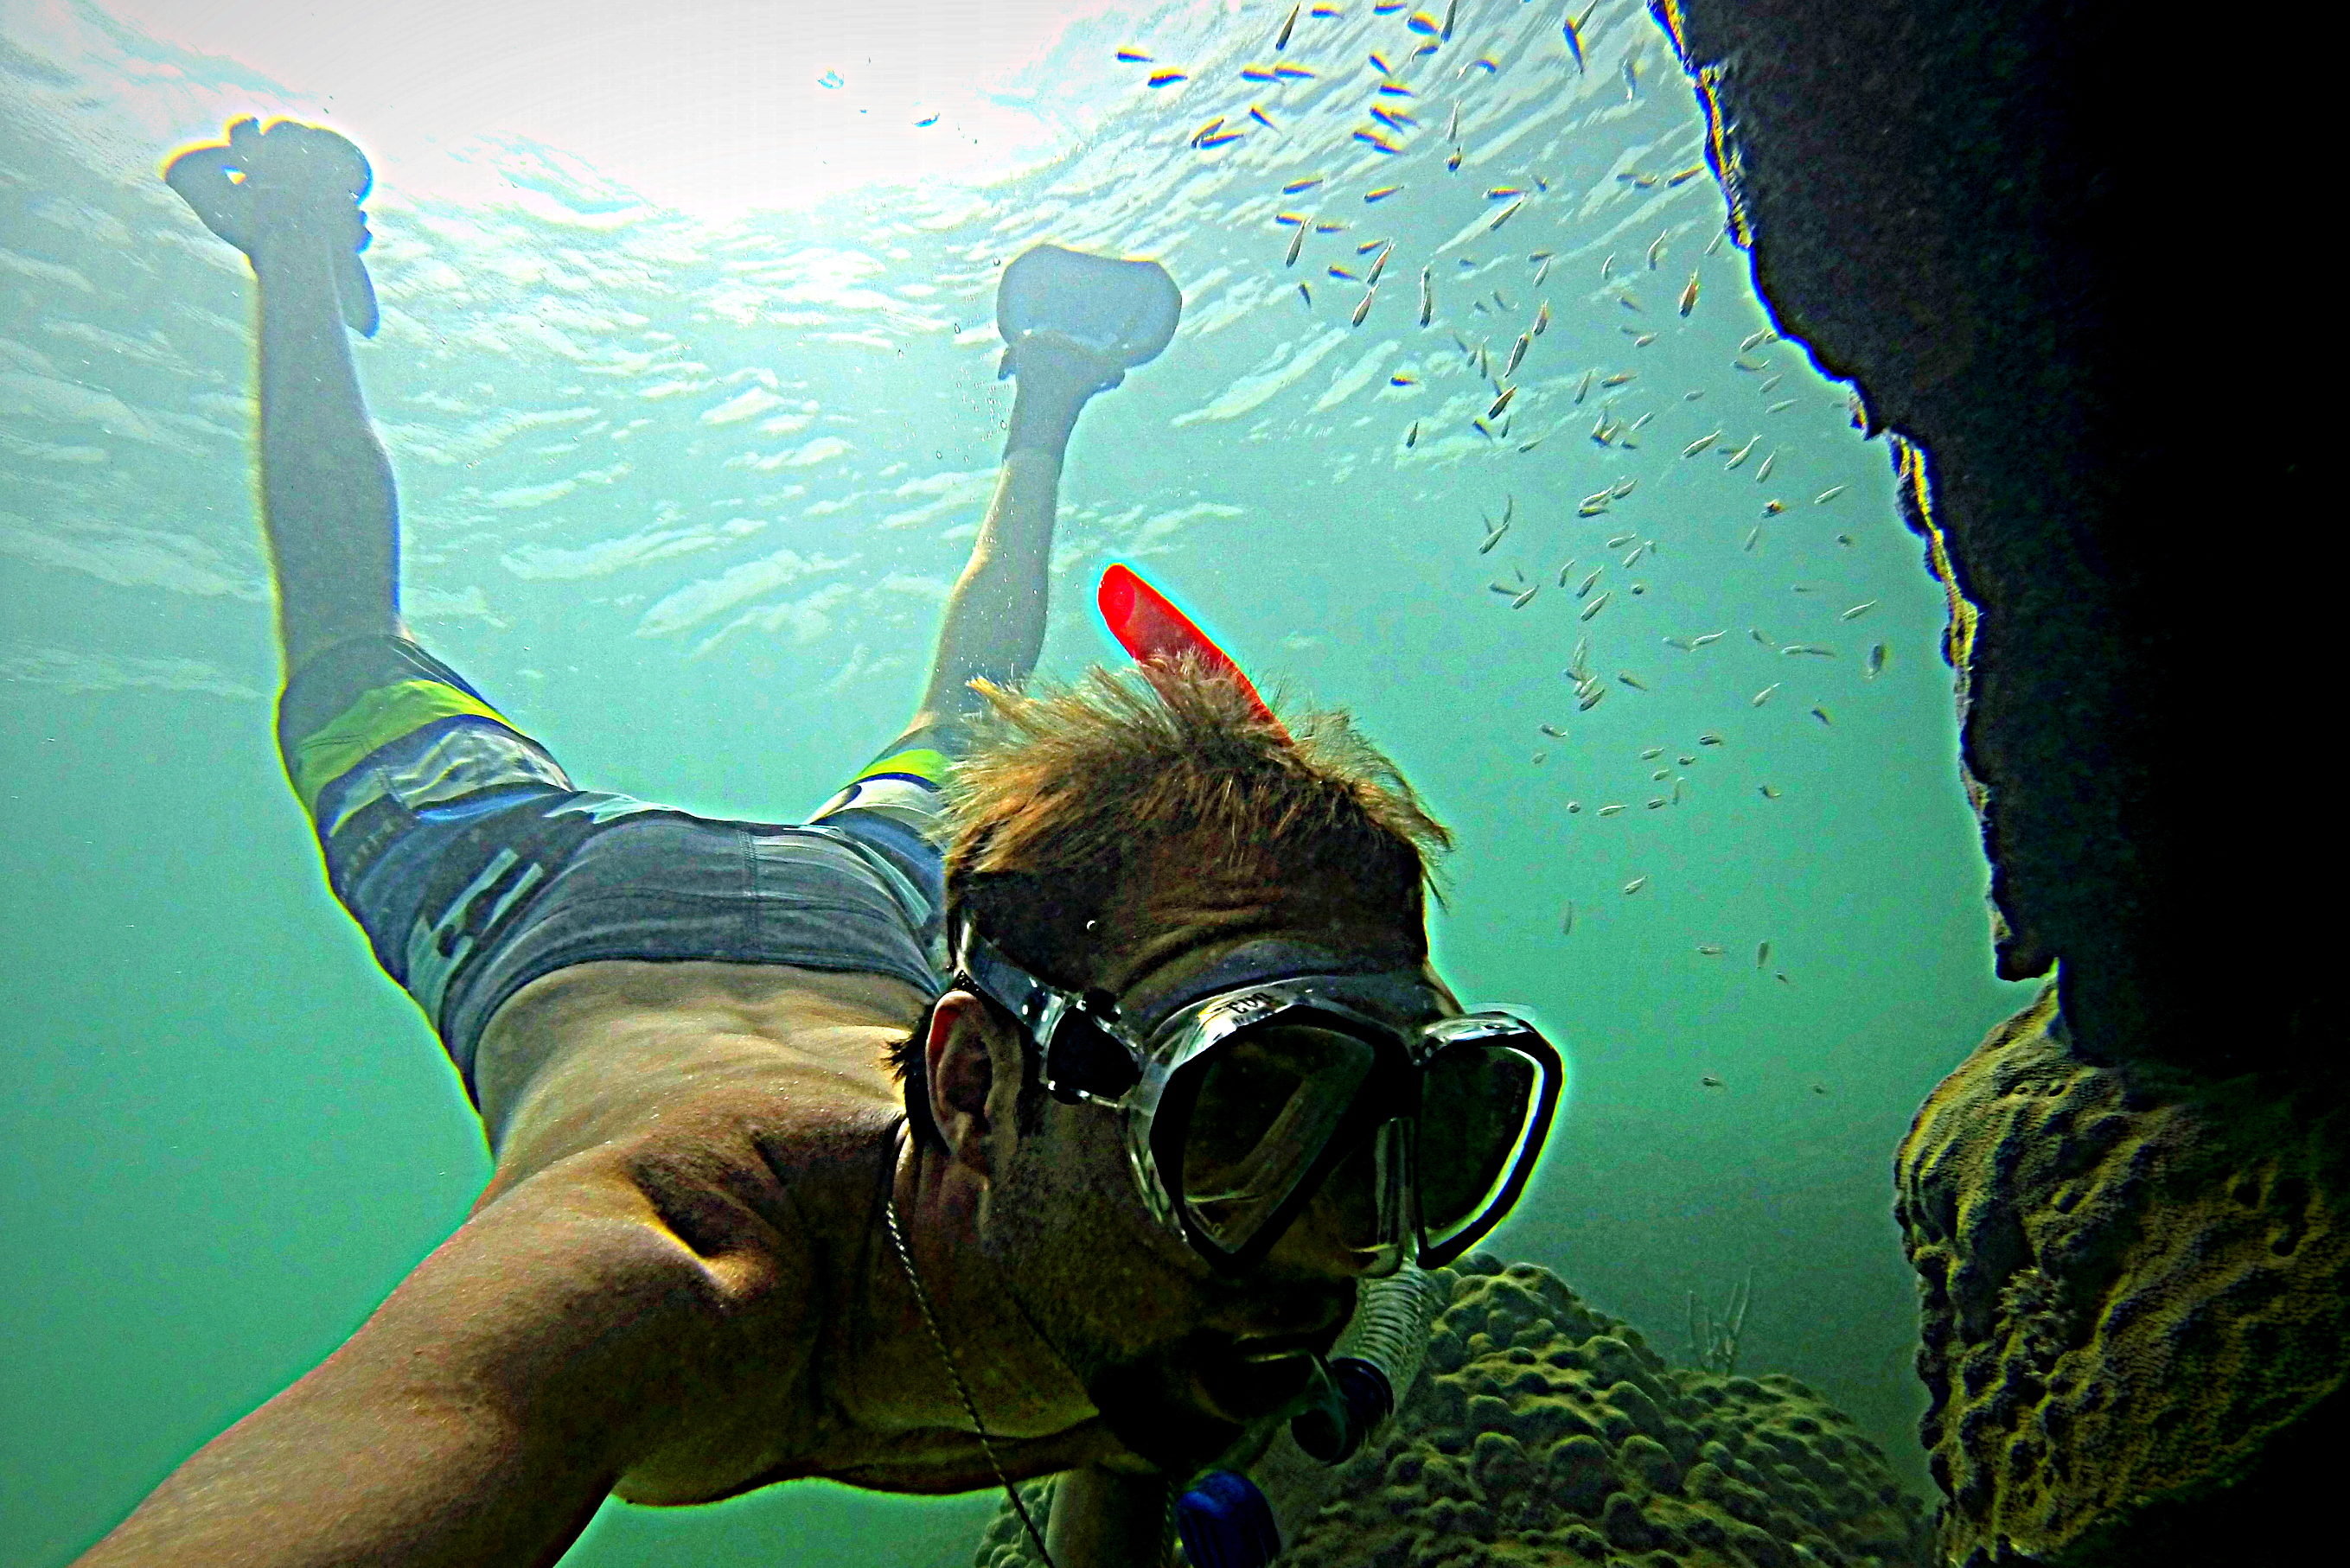 Here is a underwater shot of captain nick snorkeling a coral formation off of key west.